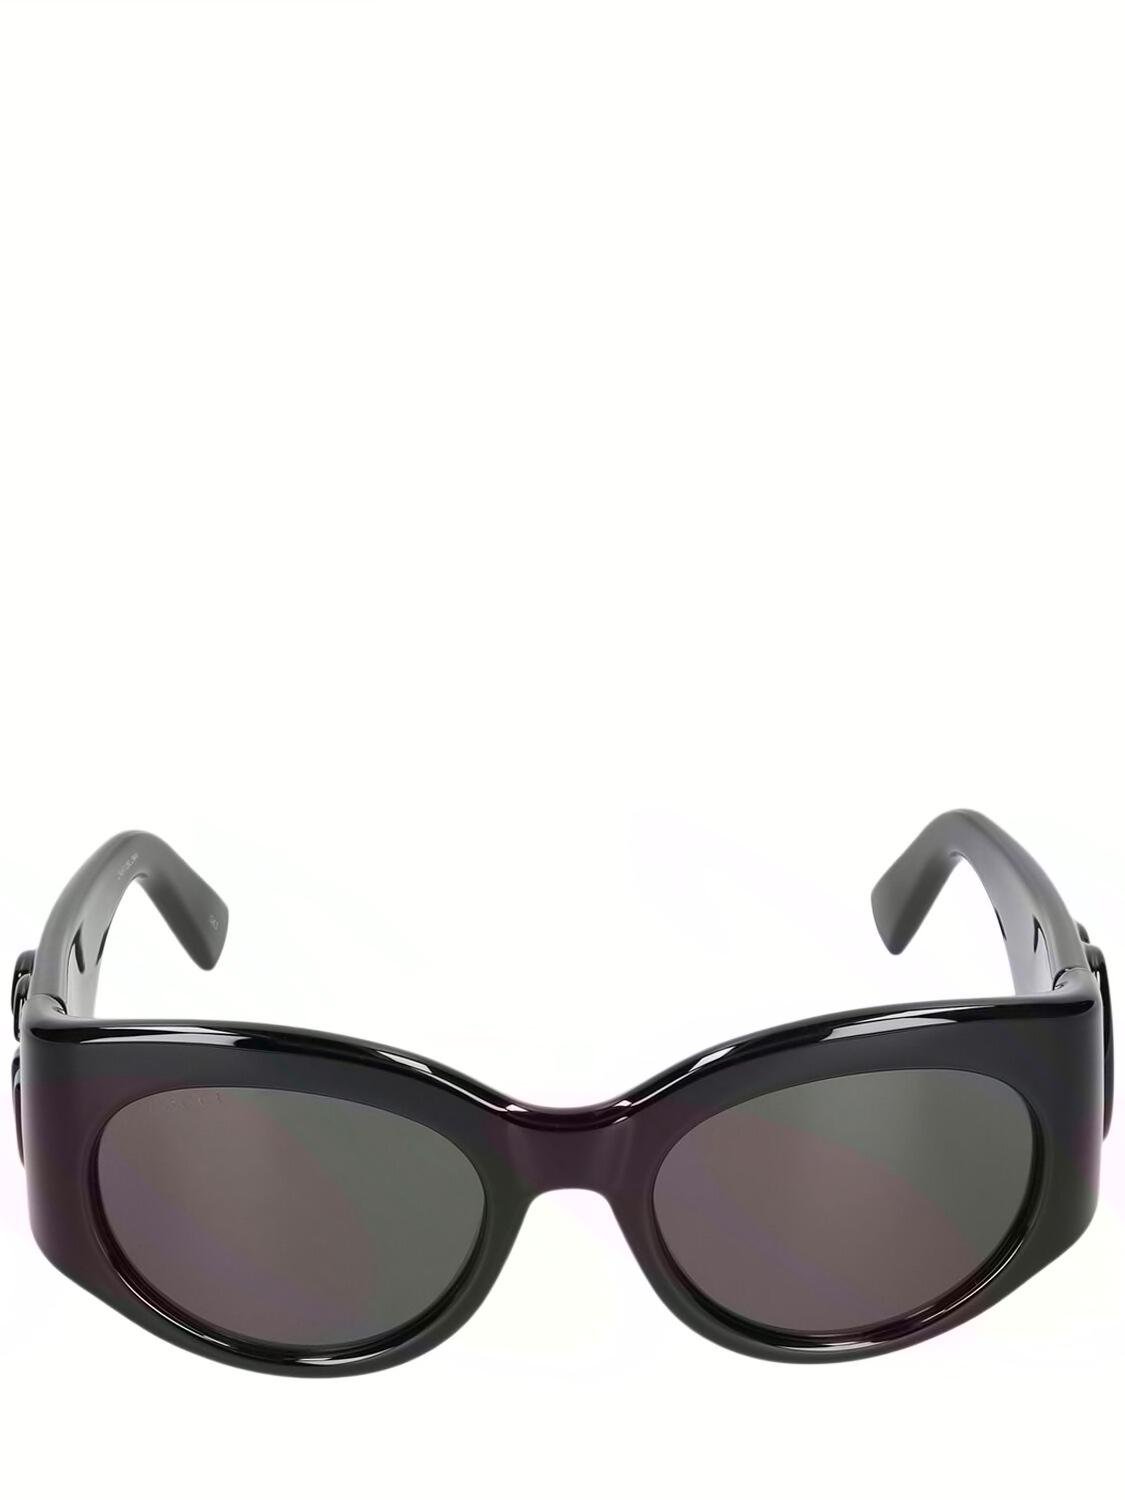 Gg1544s Injected Oval Frame Sunglasses by GUCCI